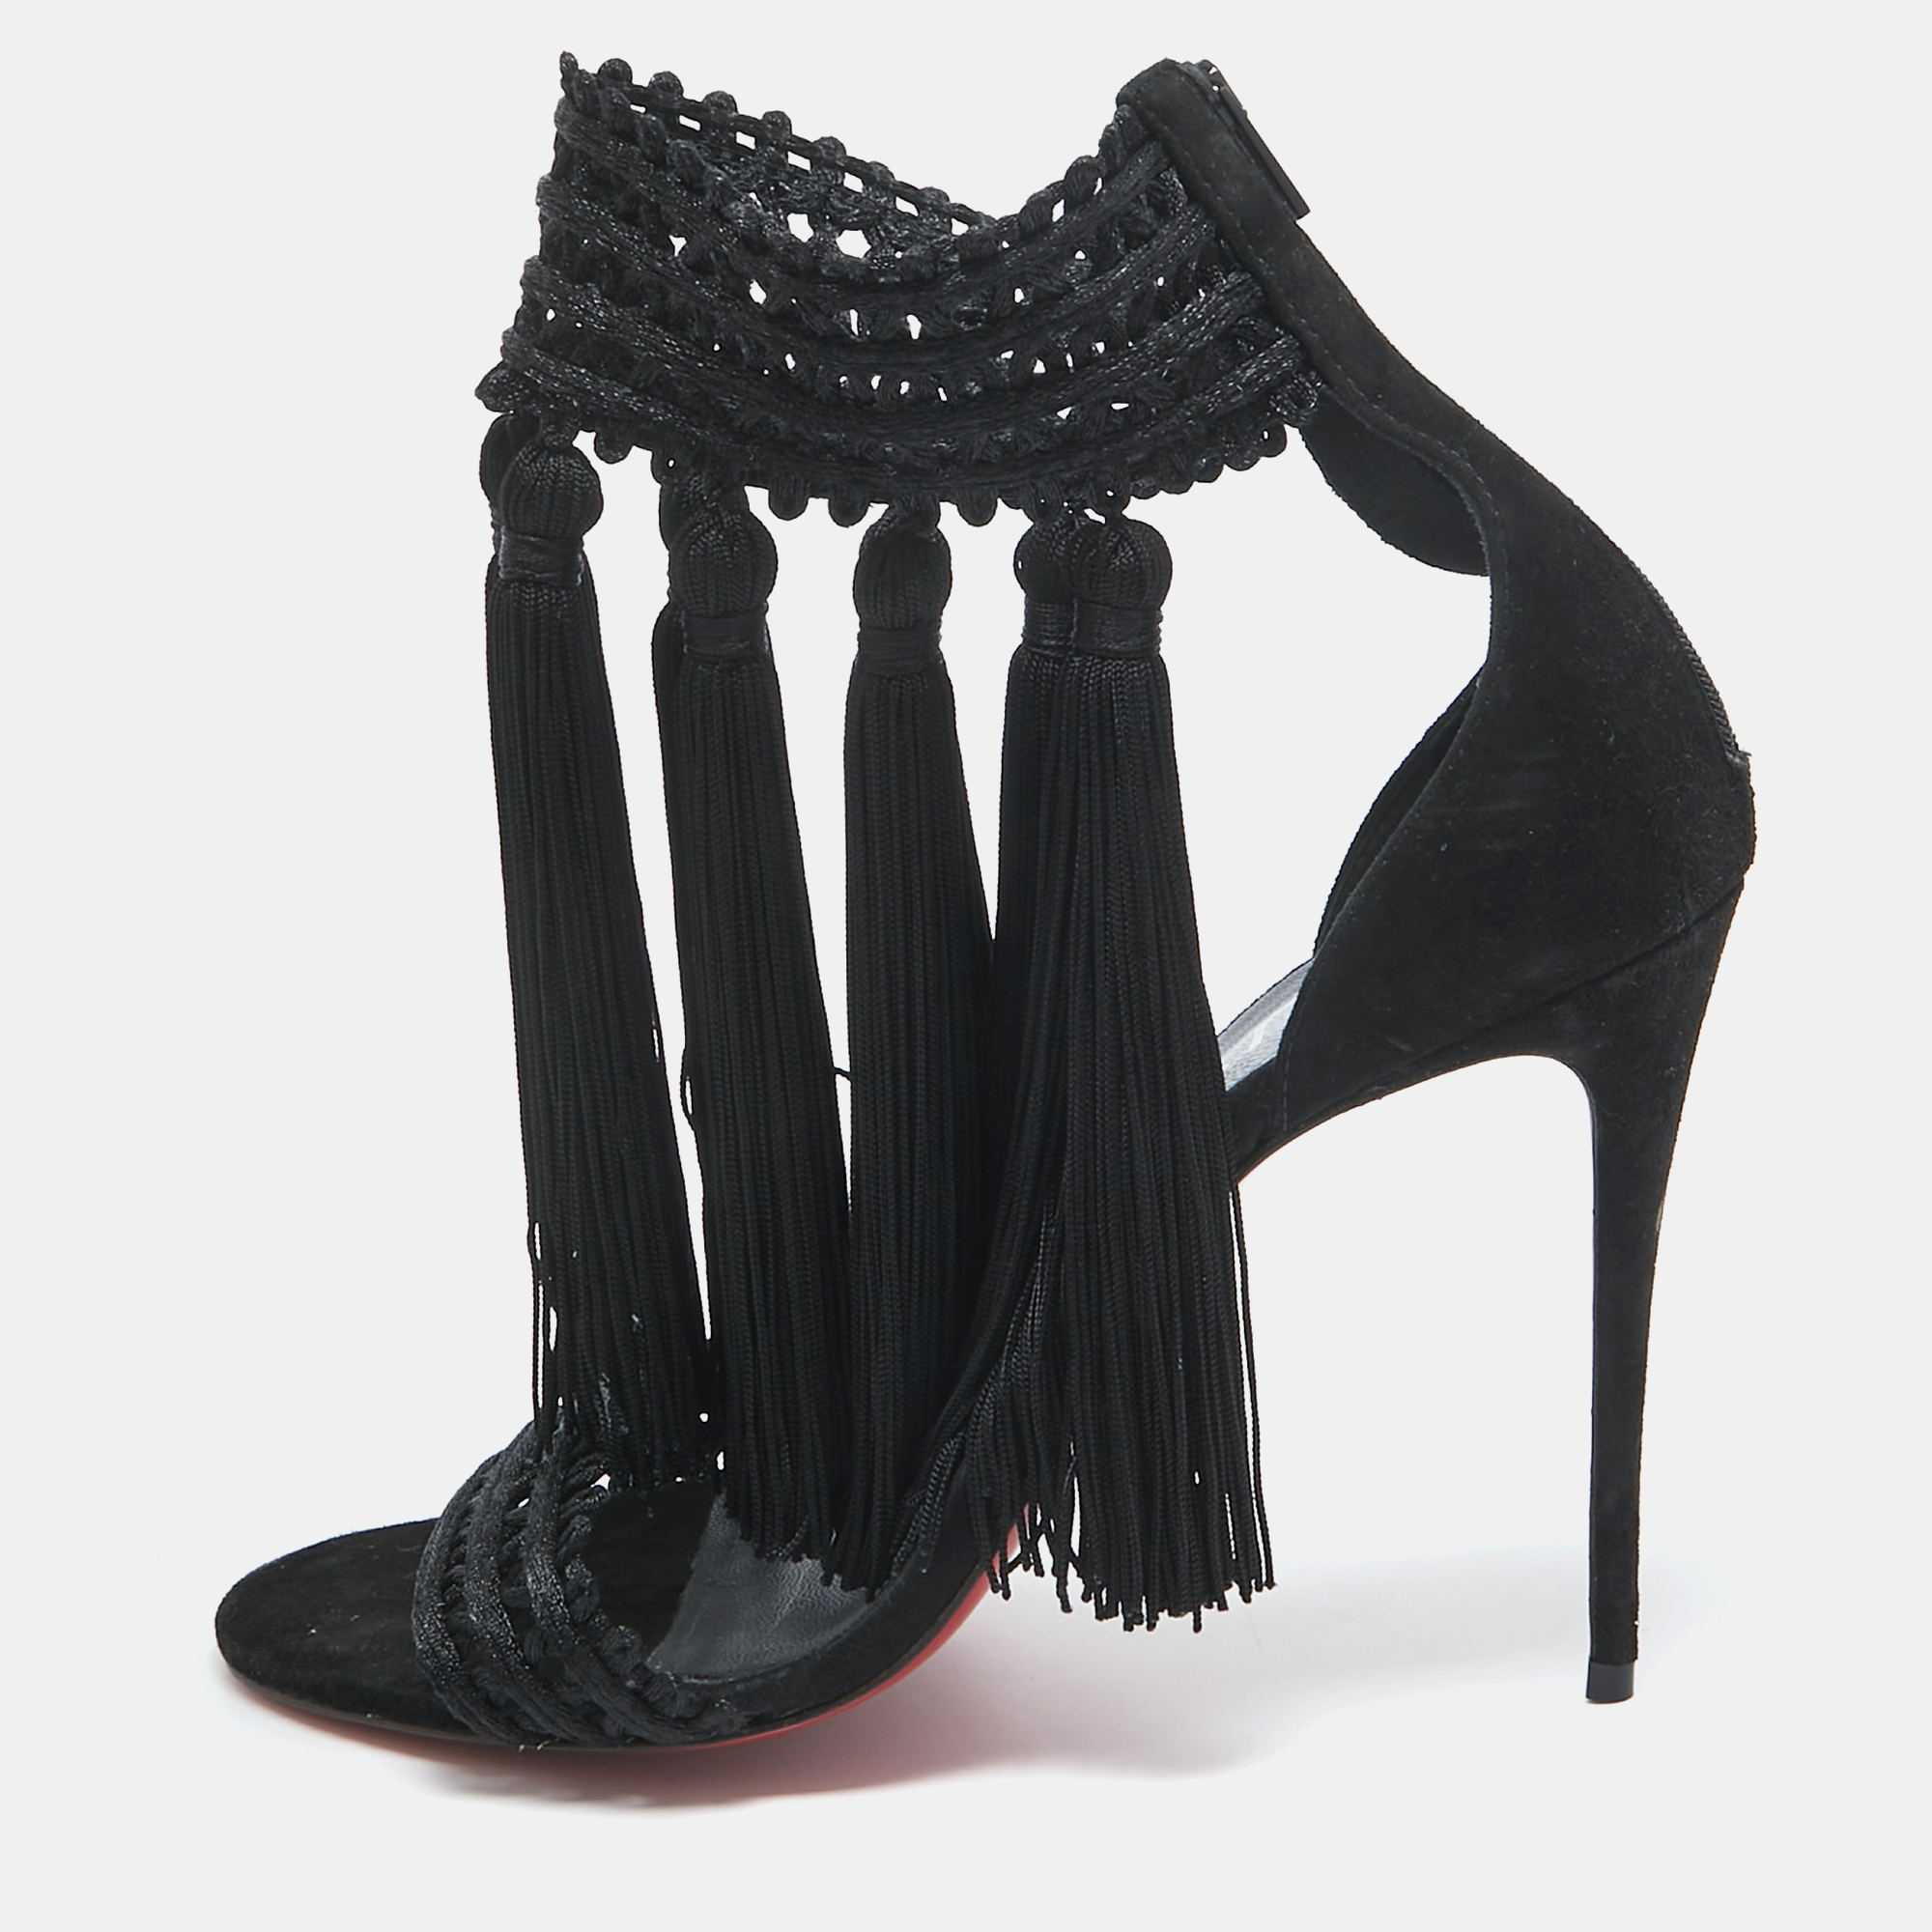 Christian louboutin black lace and suede palma macrame sandals size 40